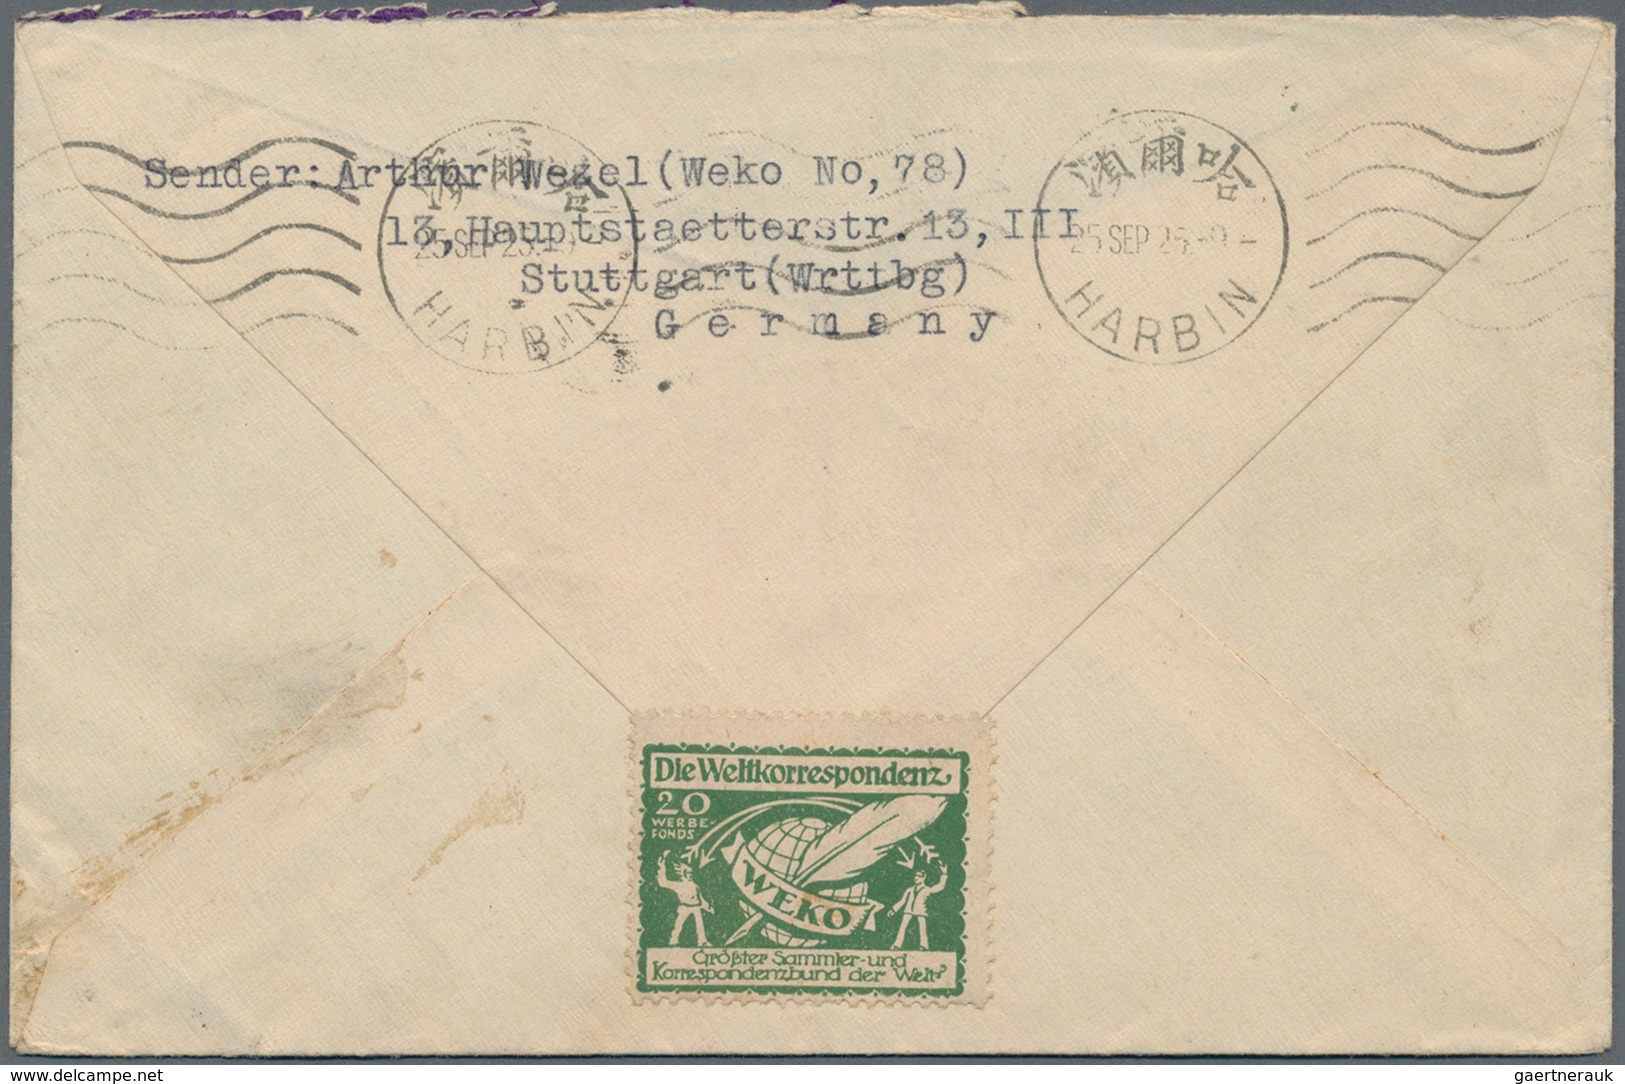 Korea: Incoming mail, Germany, 1921/25, four covers: 1921 to Gensan/Wonsan w. "10.12.25" arrival; an